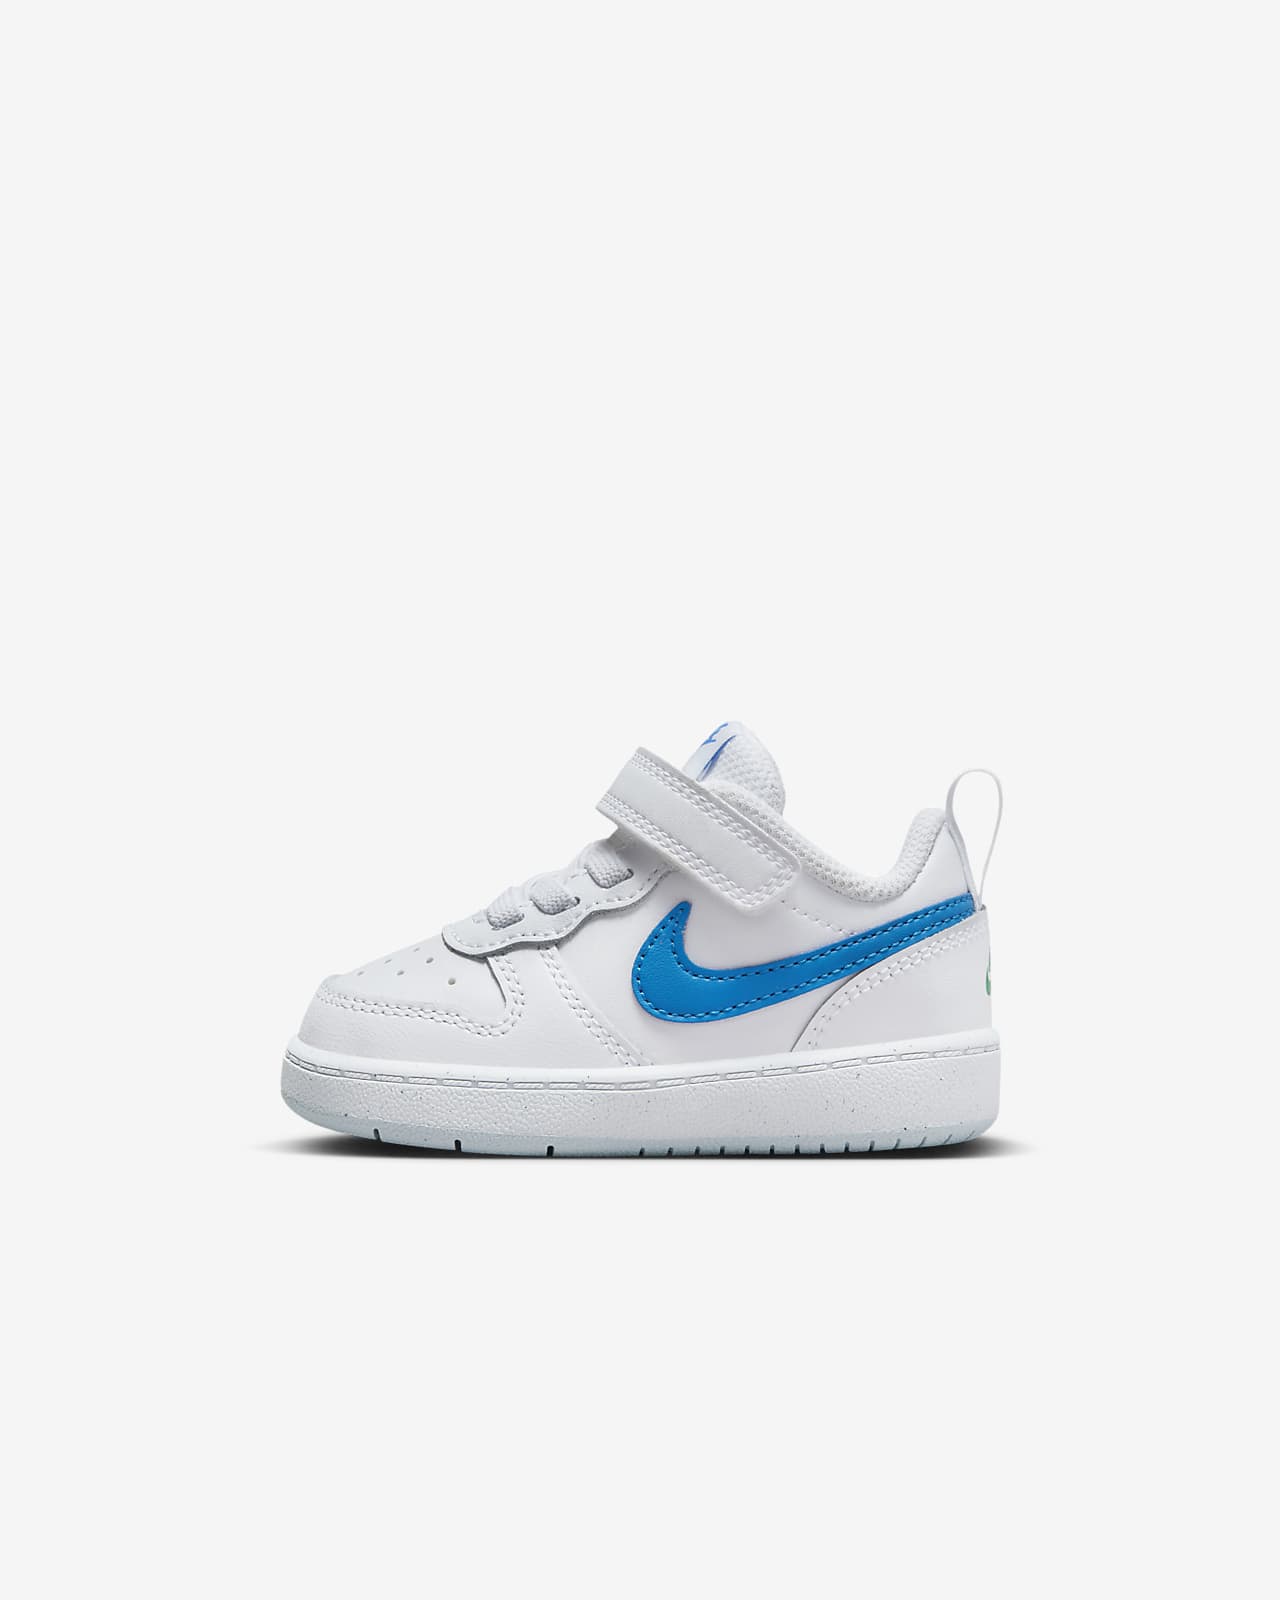 Nike Court Borough Low 2 Baby/Toddler Shoes